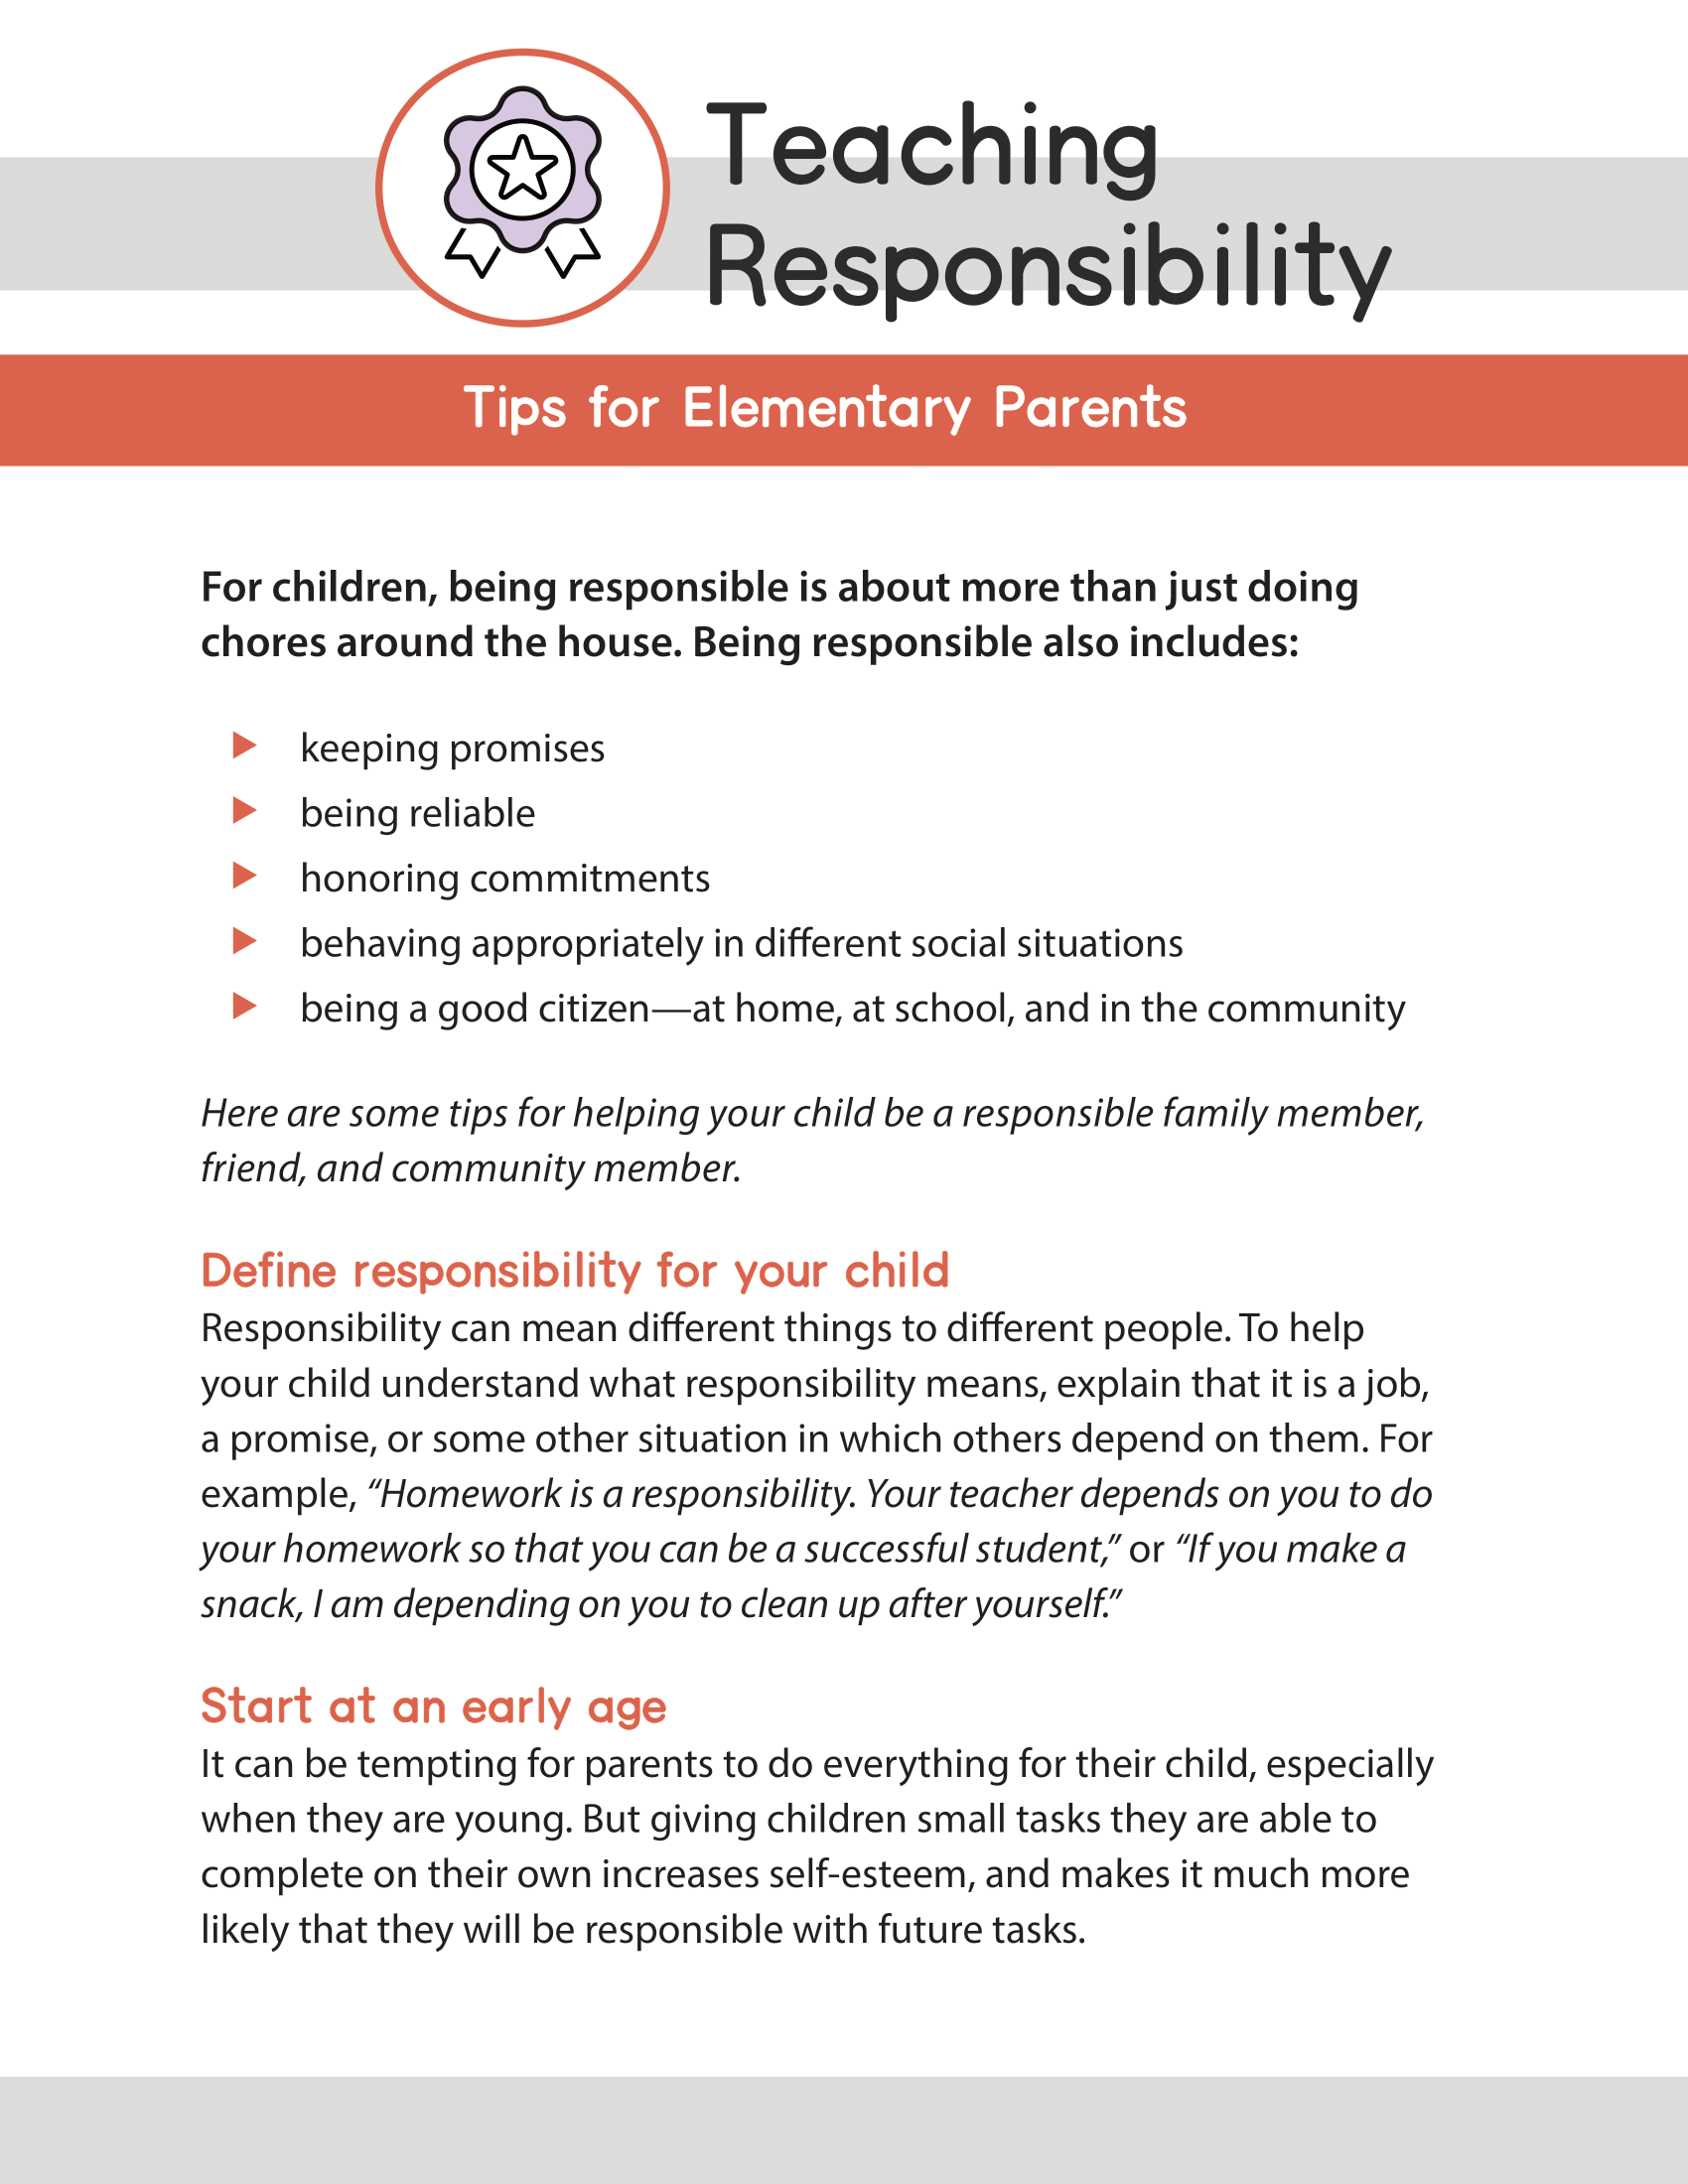 Teaching Responsibility - Tips for Elementary Parents